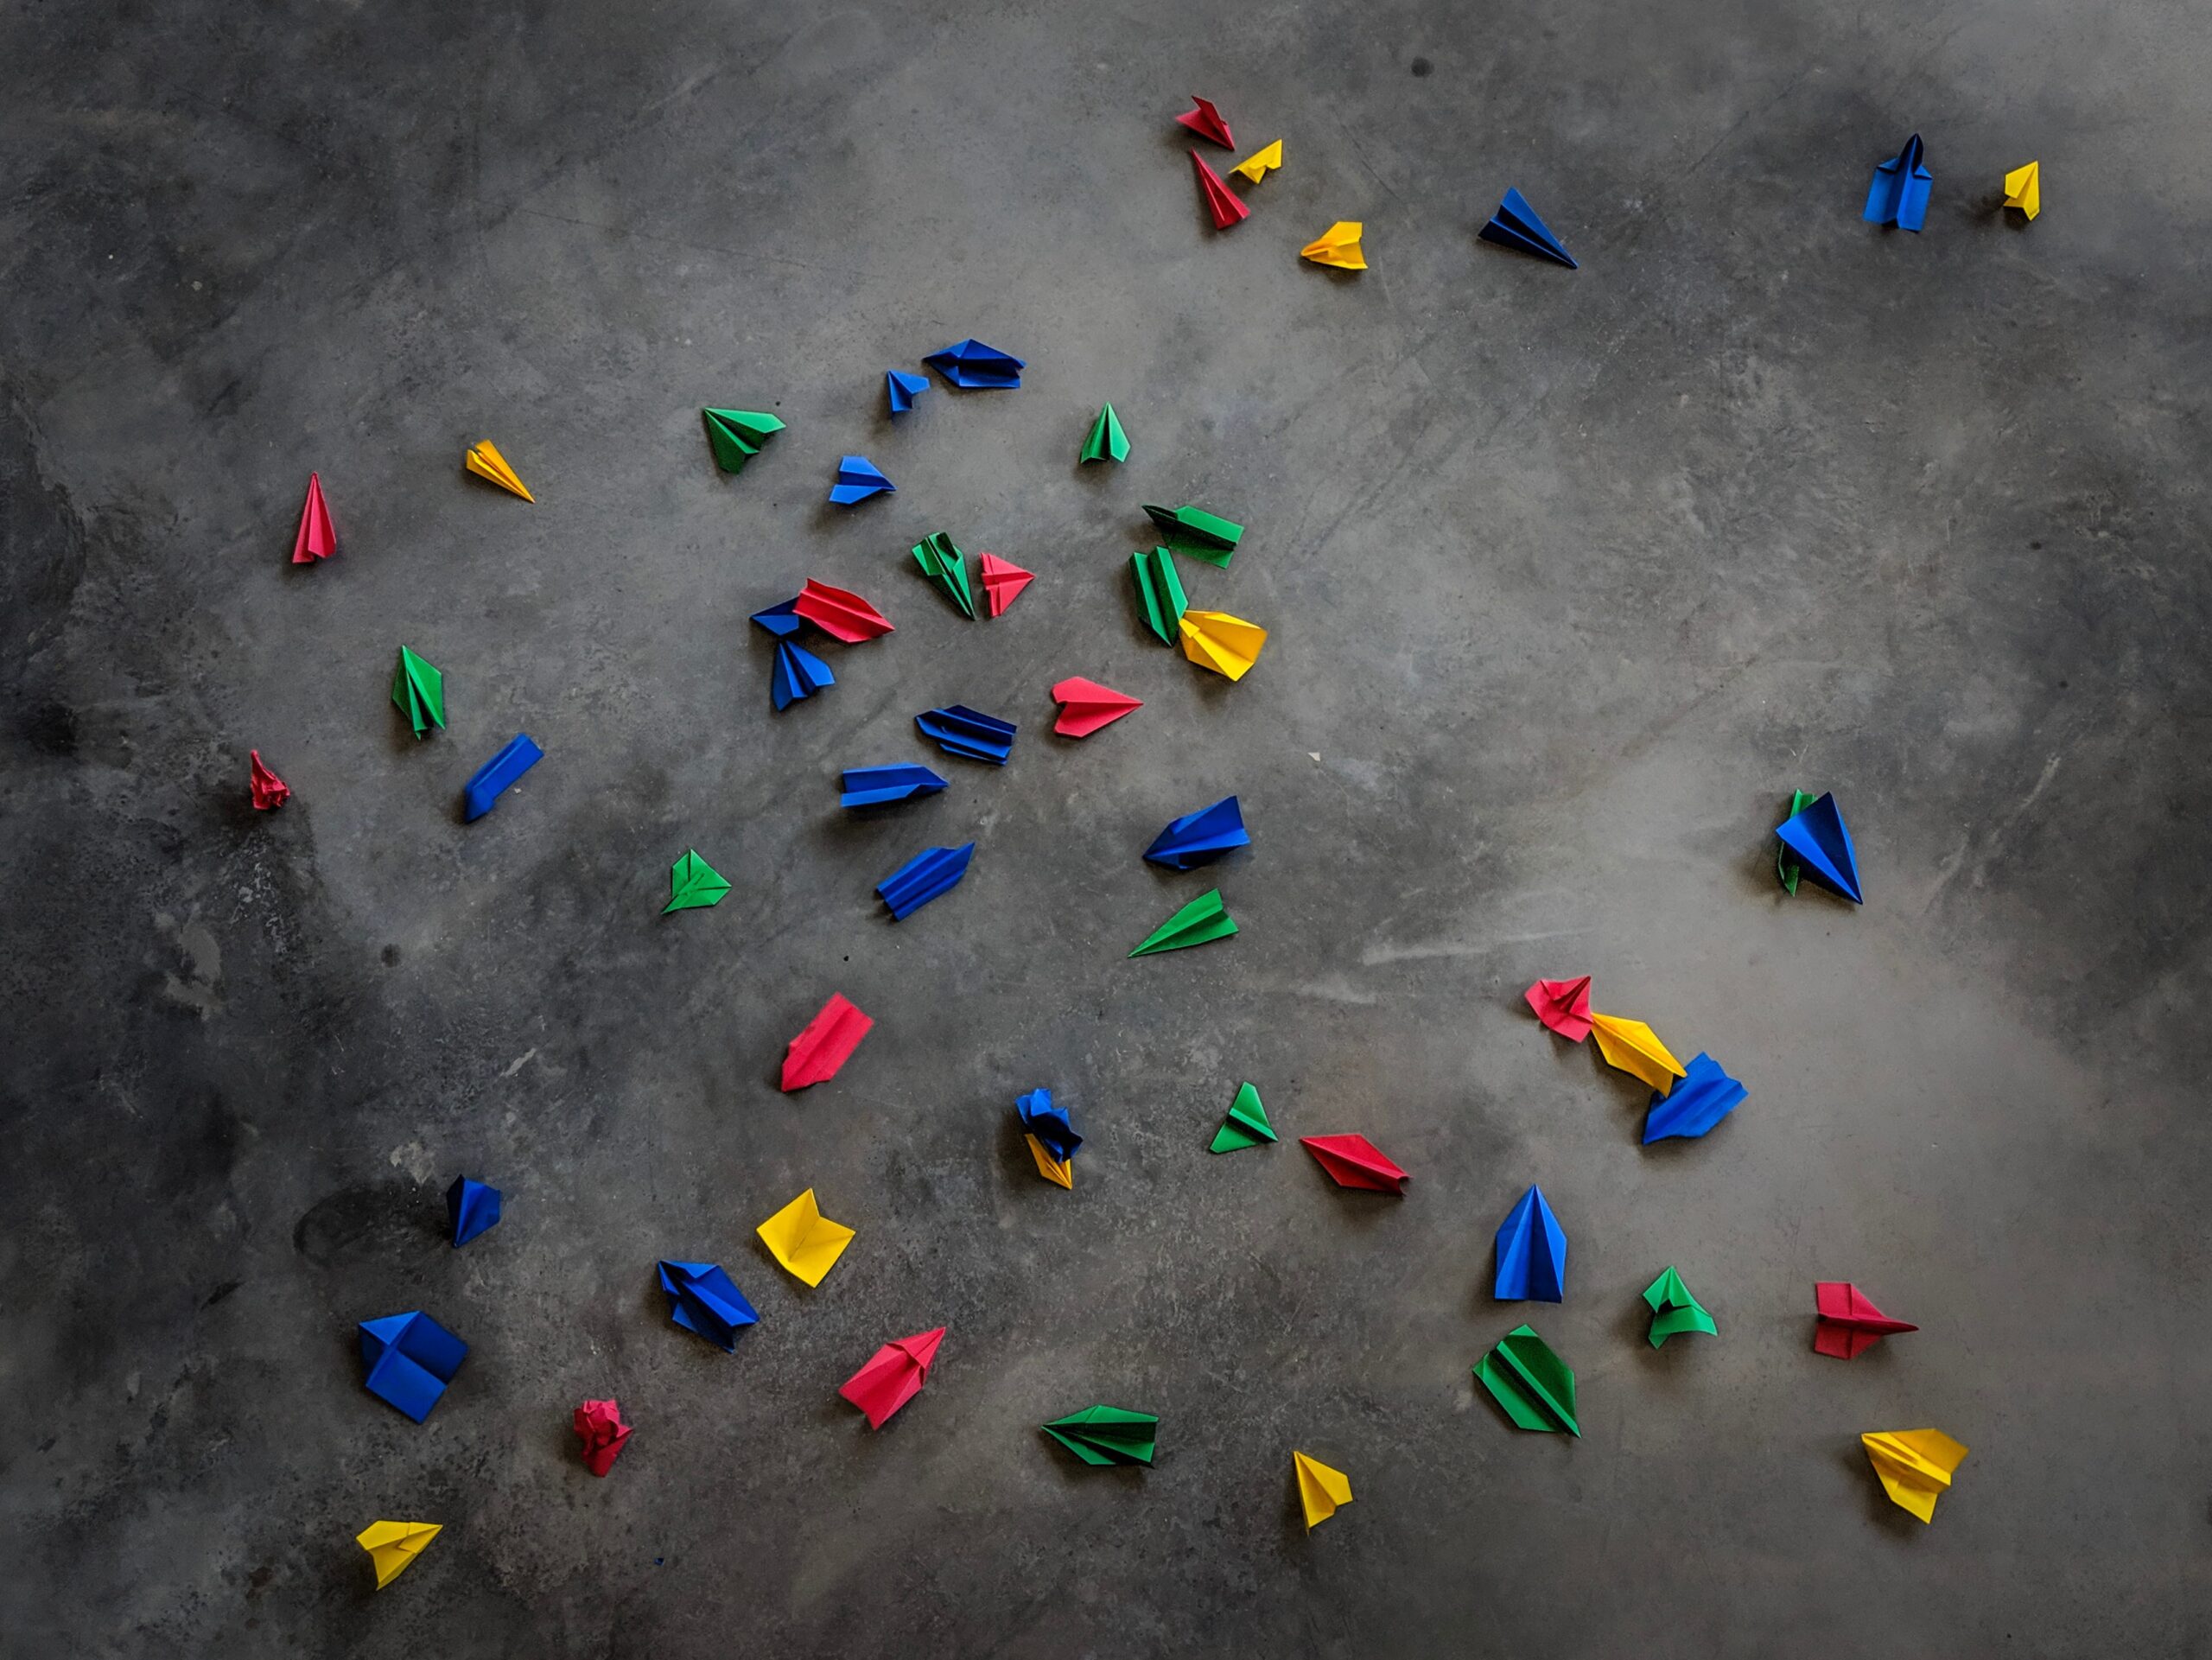 Tiny paper airplanes in the Google logo colours scattered on the floor